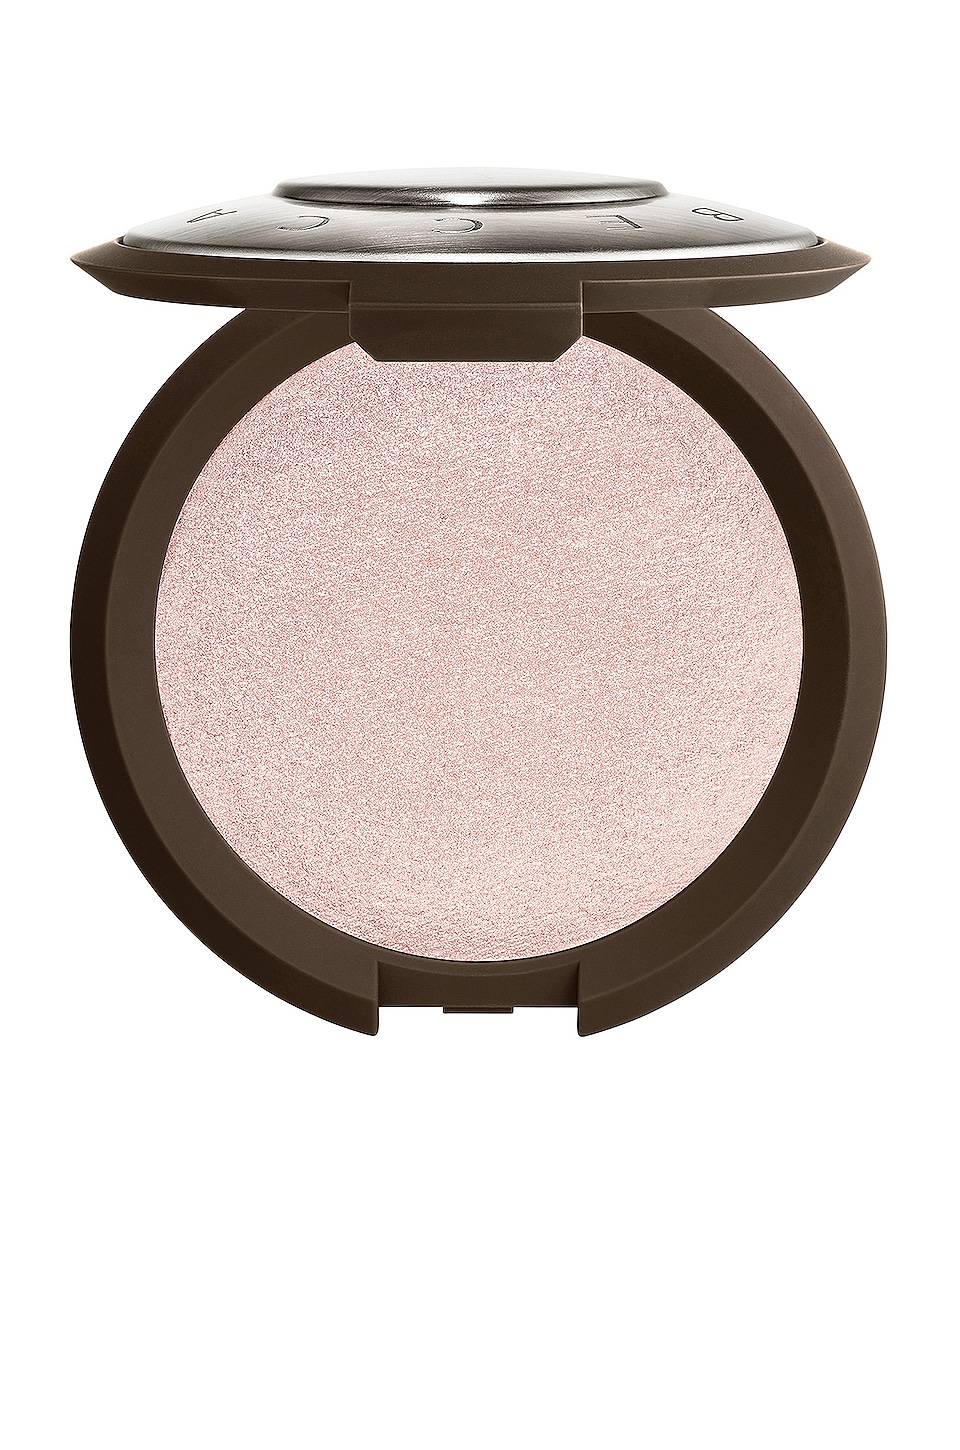 BECCA COSMETICS SHIMMERING SKIN PERFECTOR PRESSED HIGHLIGHTER,BECR-WU148